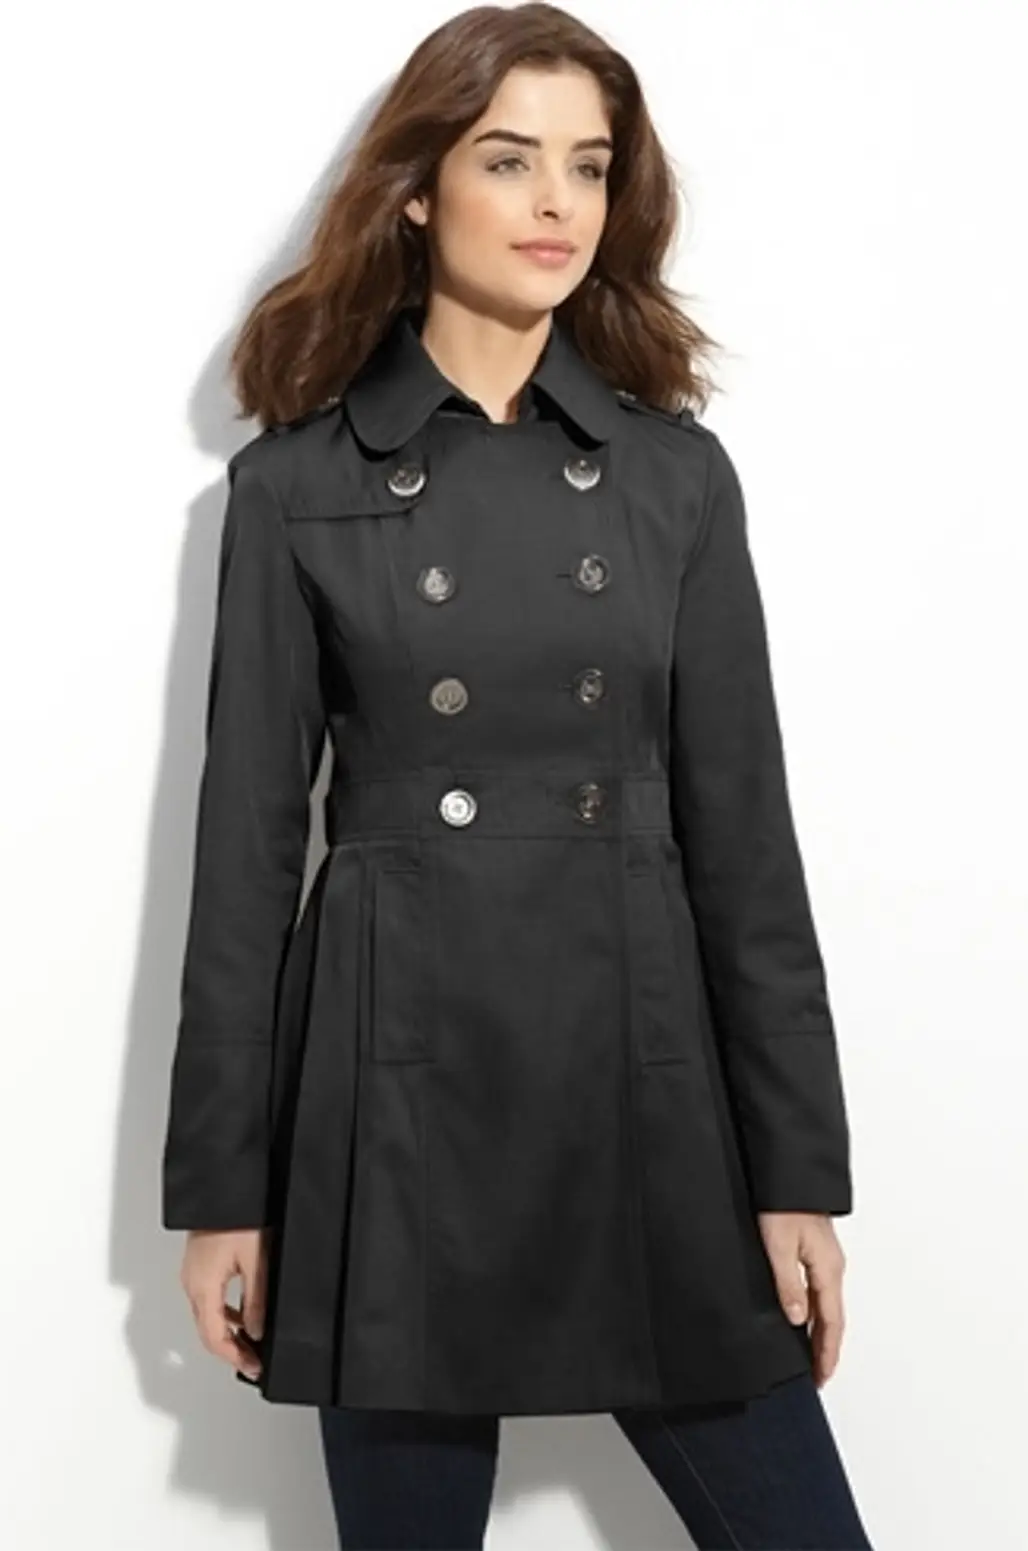 8 Fab Trench Coats for the Fall ...